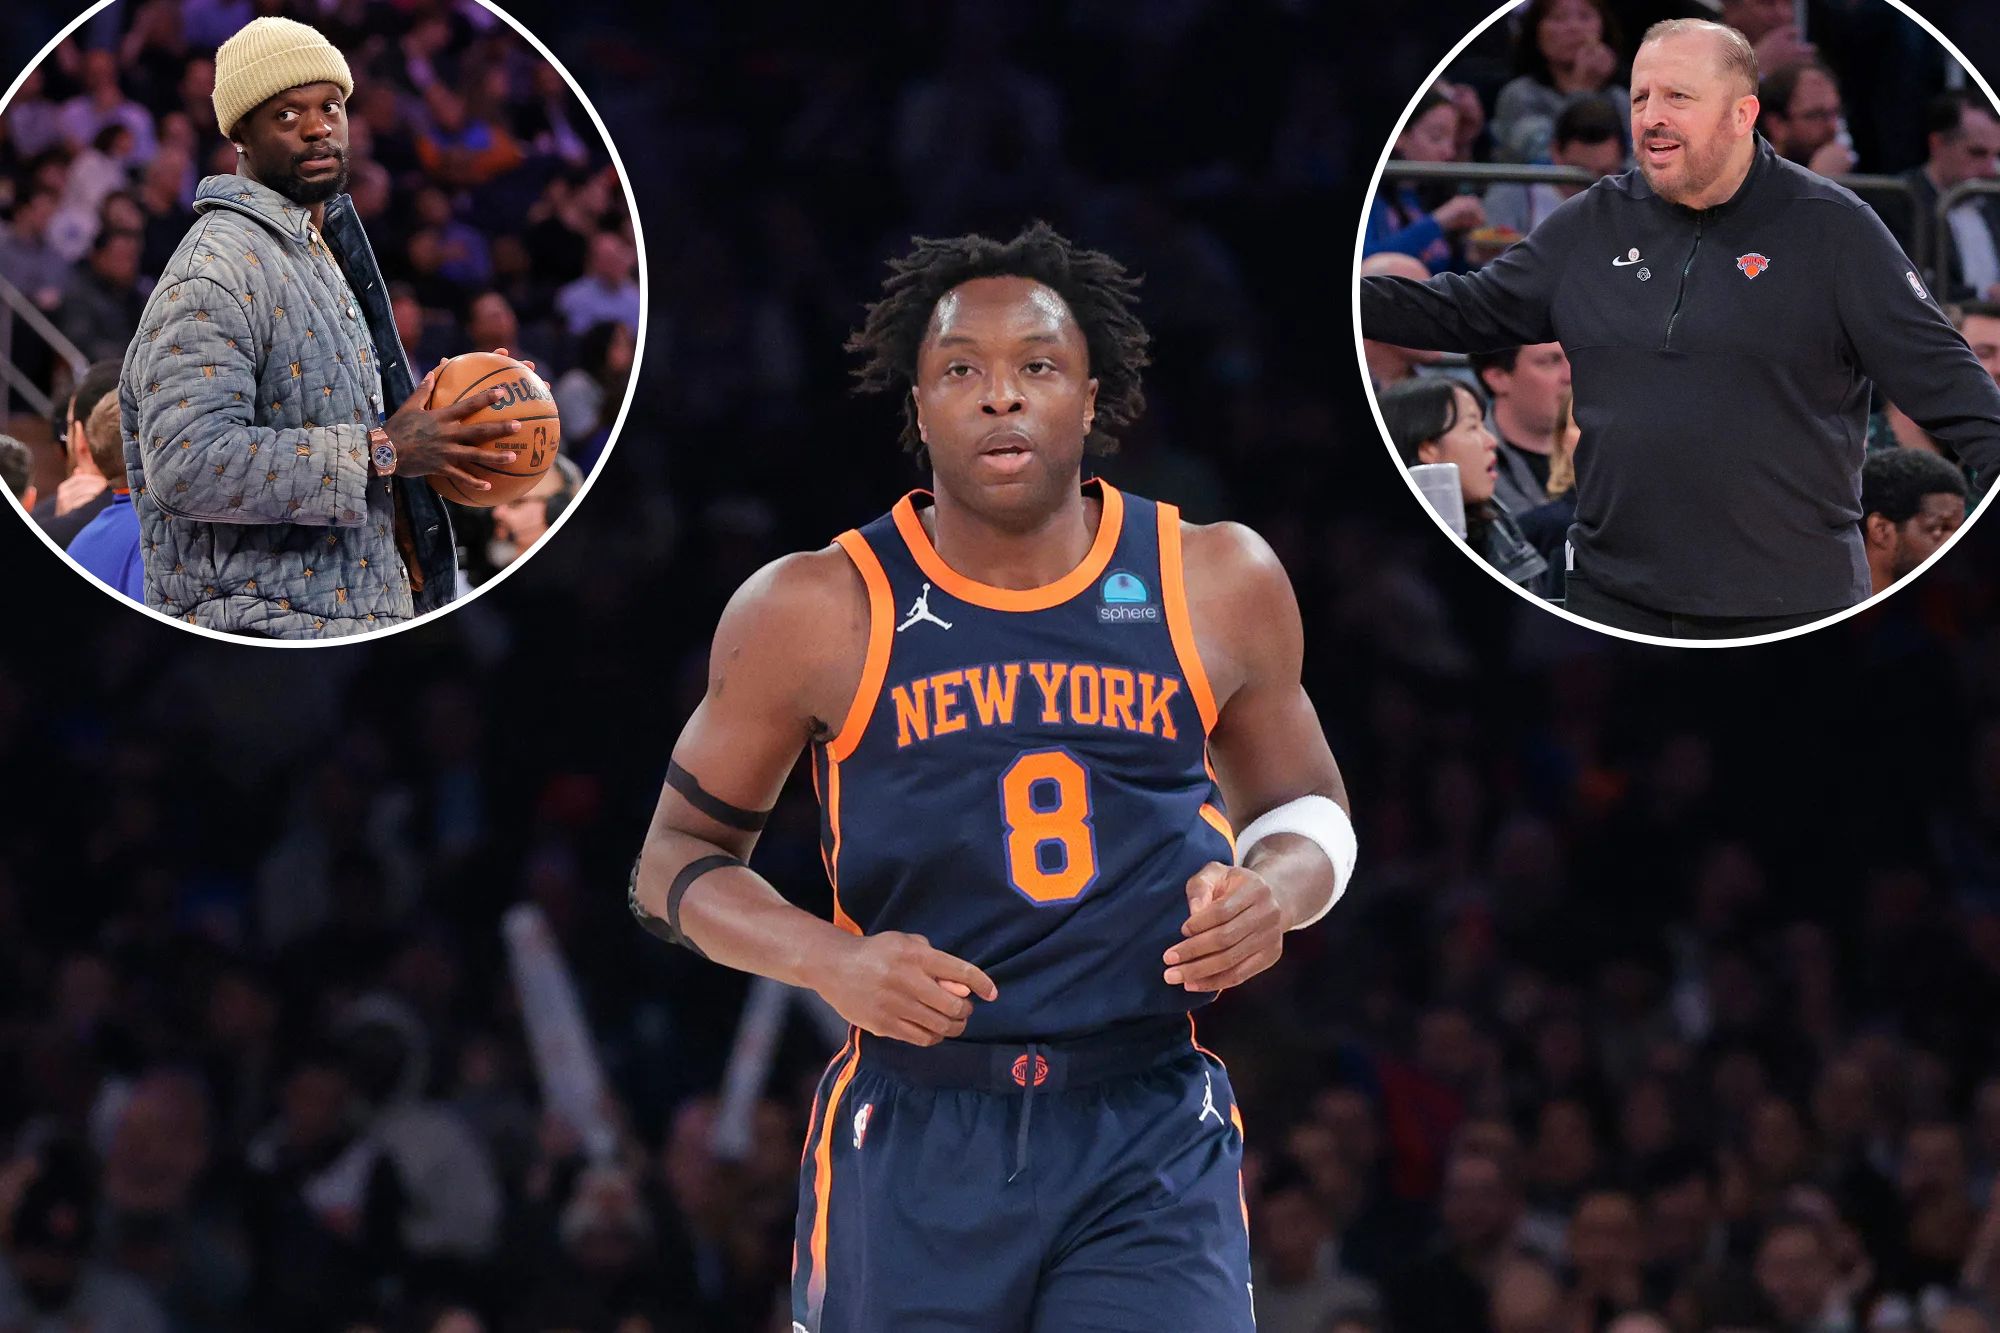 The Knicks could still get OG Anunoby back from injury before the postseason begins.